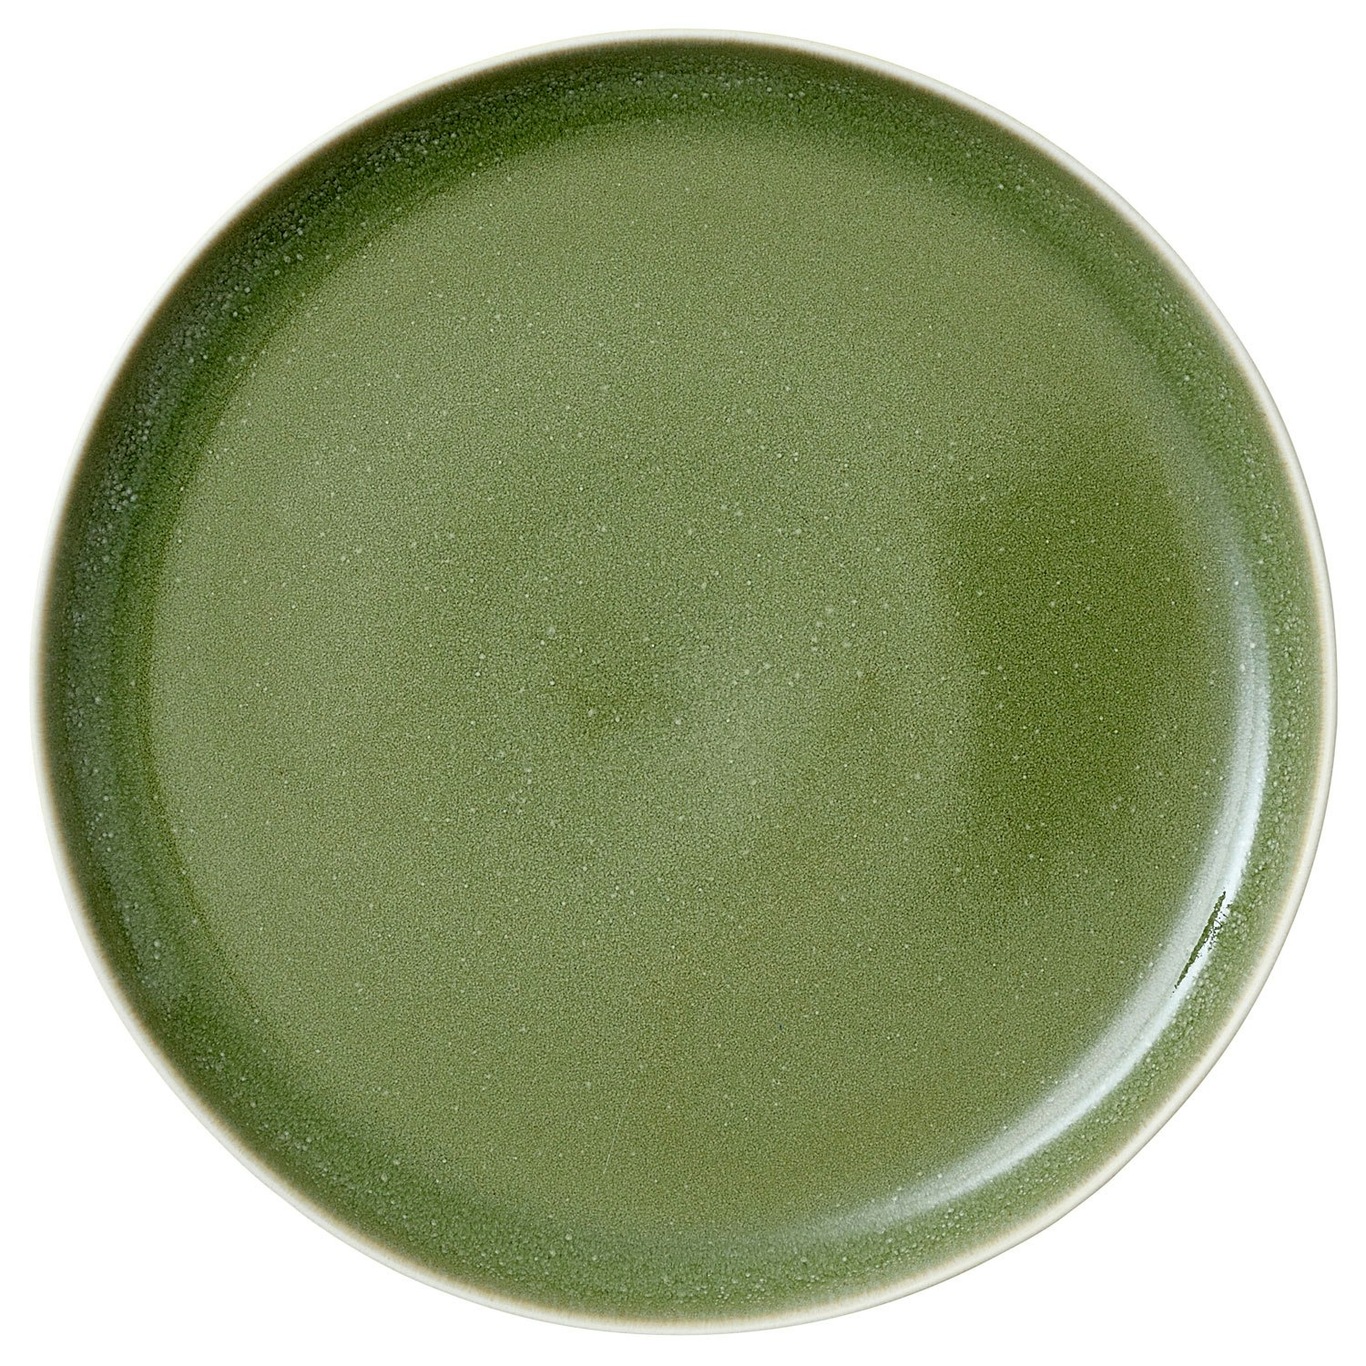 North Lunch Plate 21 cm, Matte White/Shiny Moss